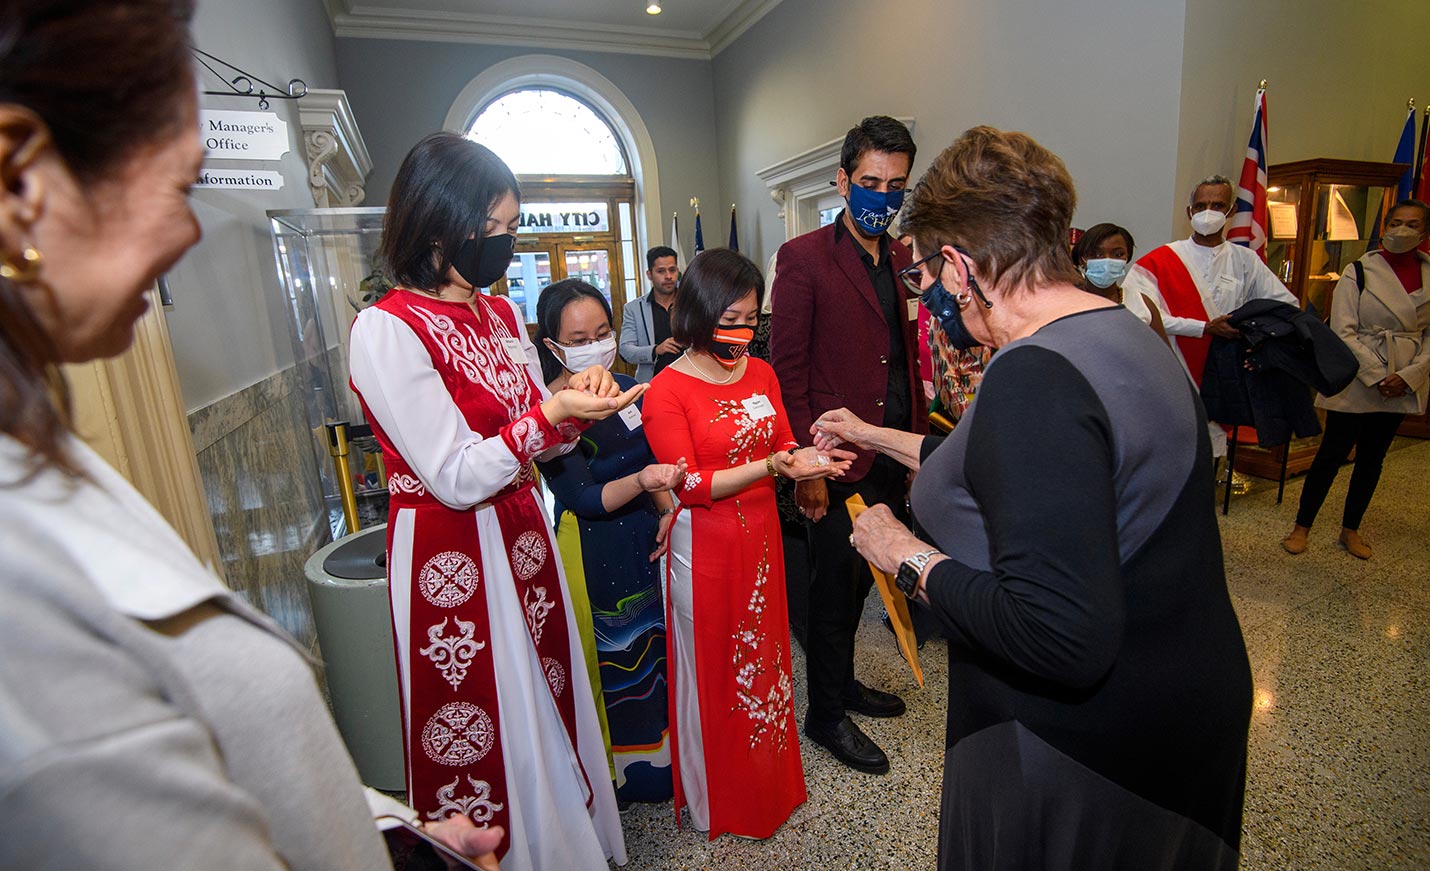 Women in ceremonial dress and masks receive gifts in the lobby of Wilmington City Hall